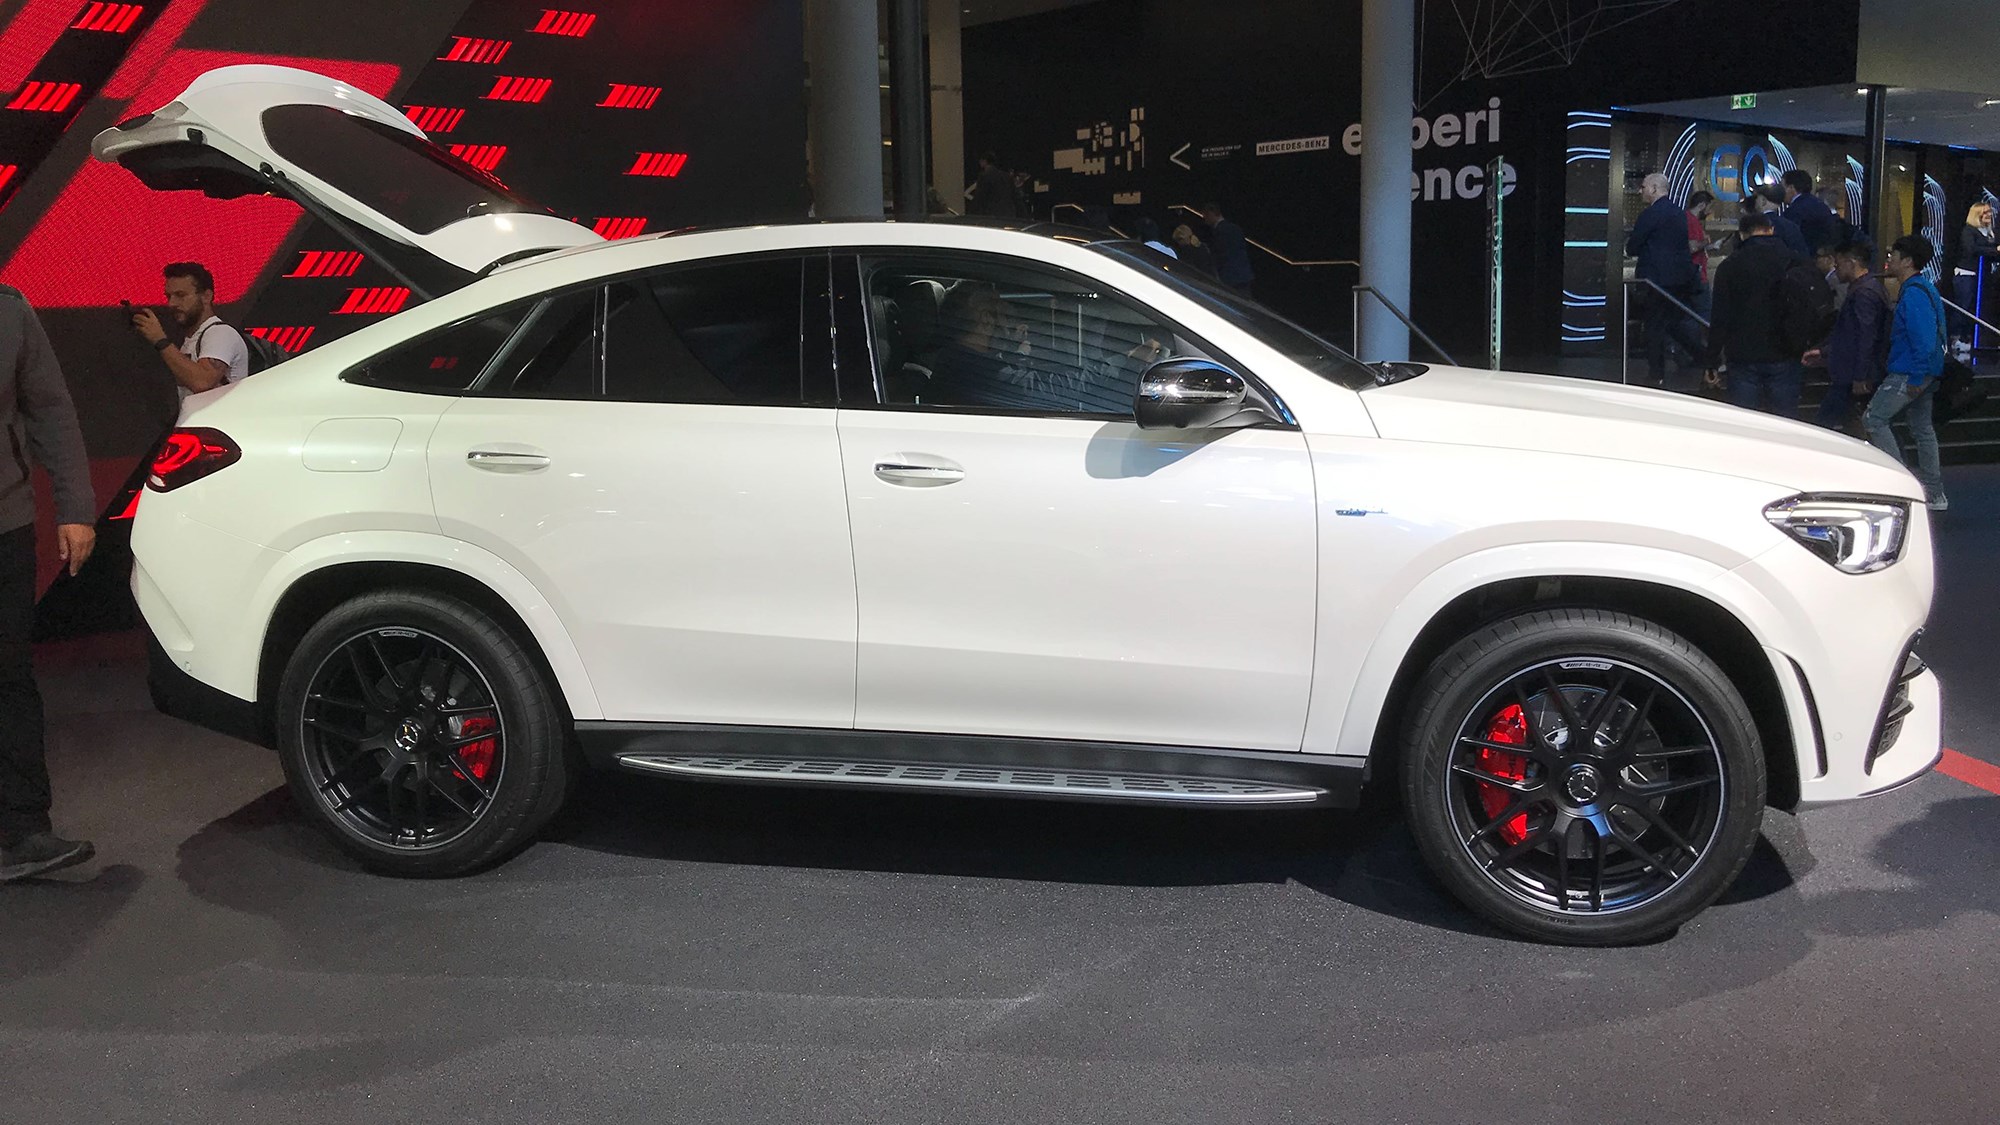 Mercedes Gle Hybrid First Official Pictures Car Magazine